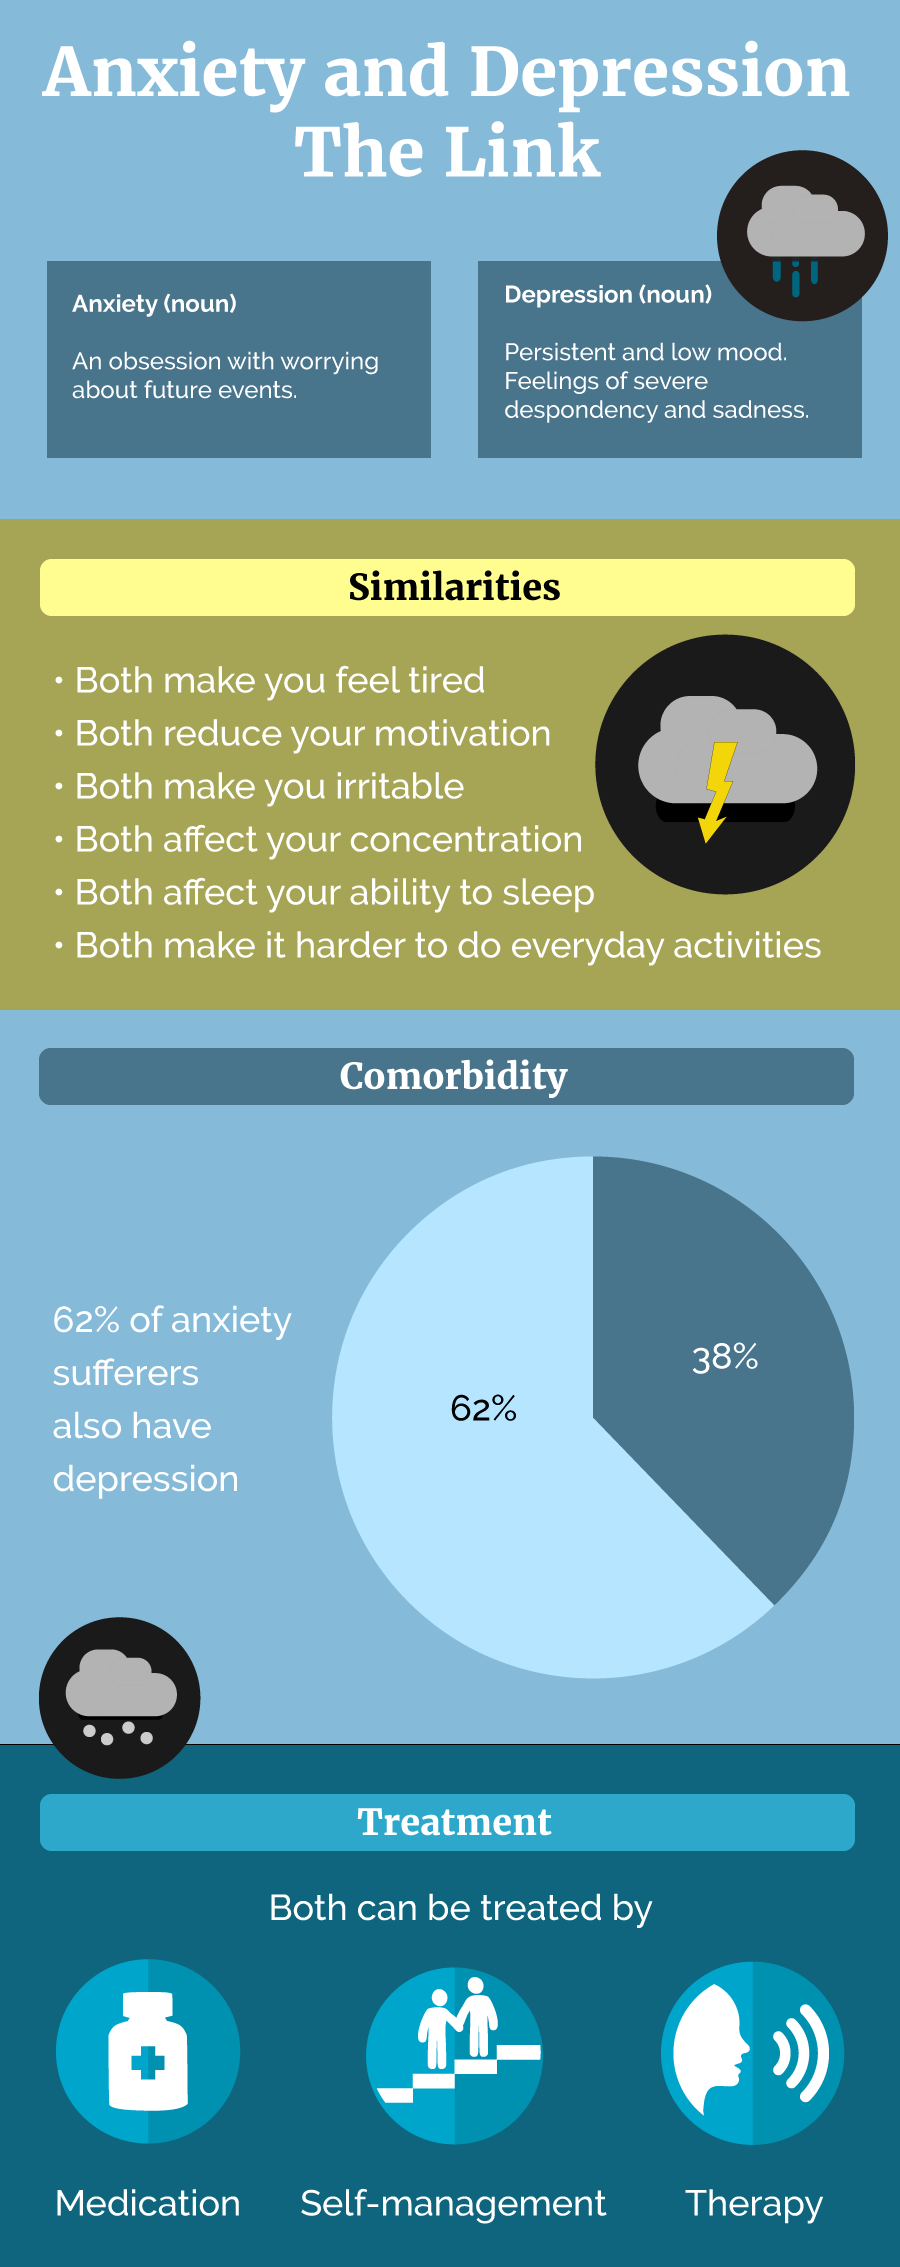 Anxiety and Depression: The Link